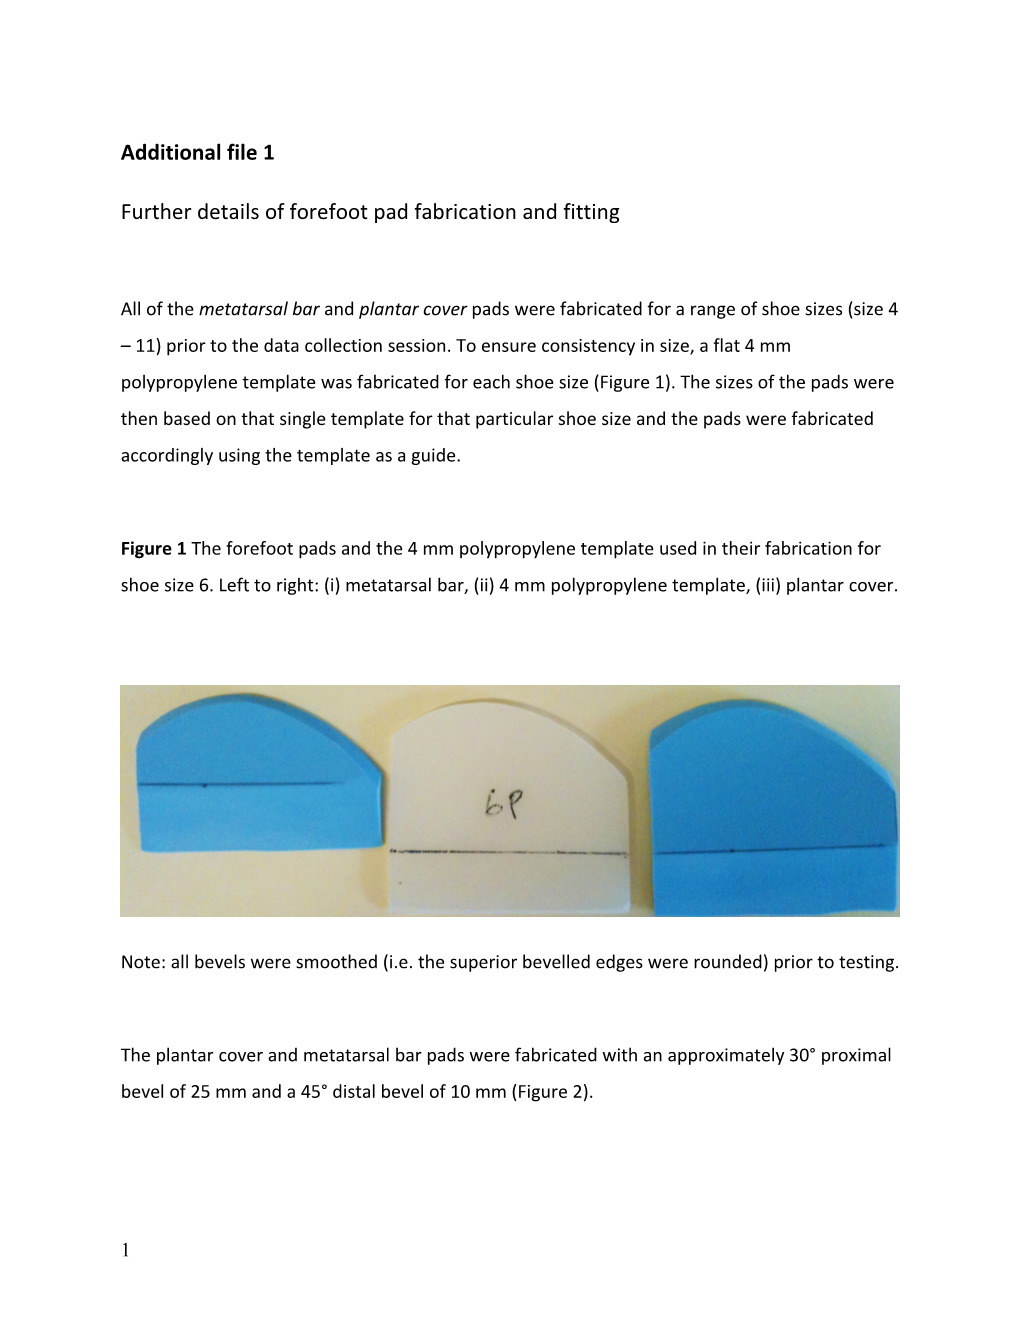 Further Details of Forefoot Pad Fabrication and Fitting